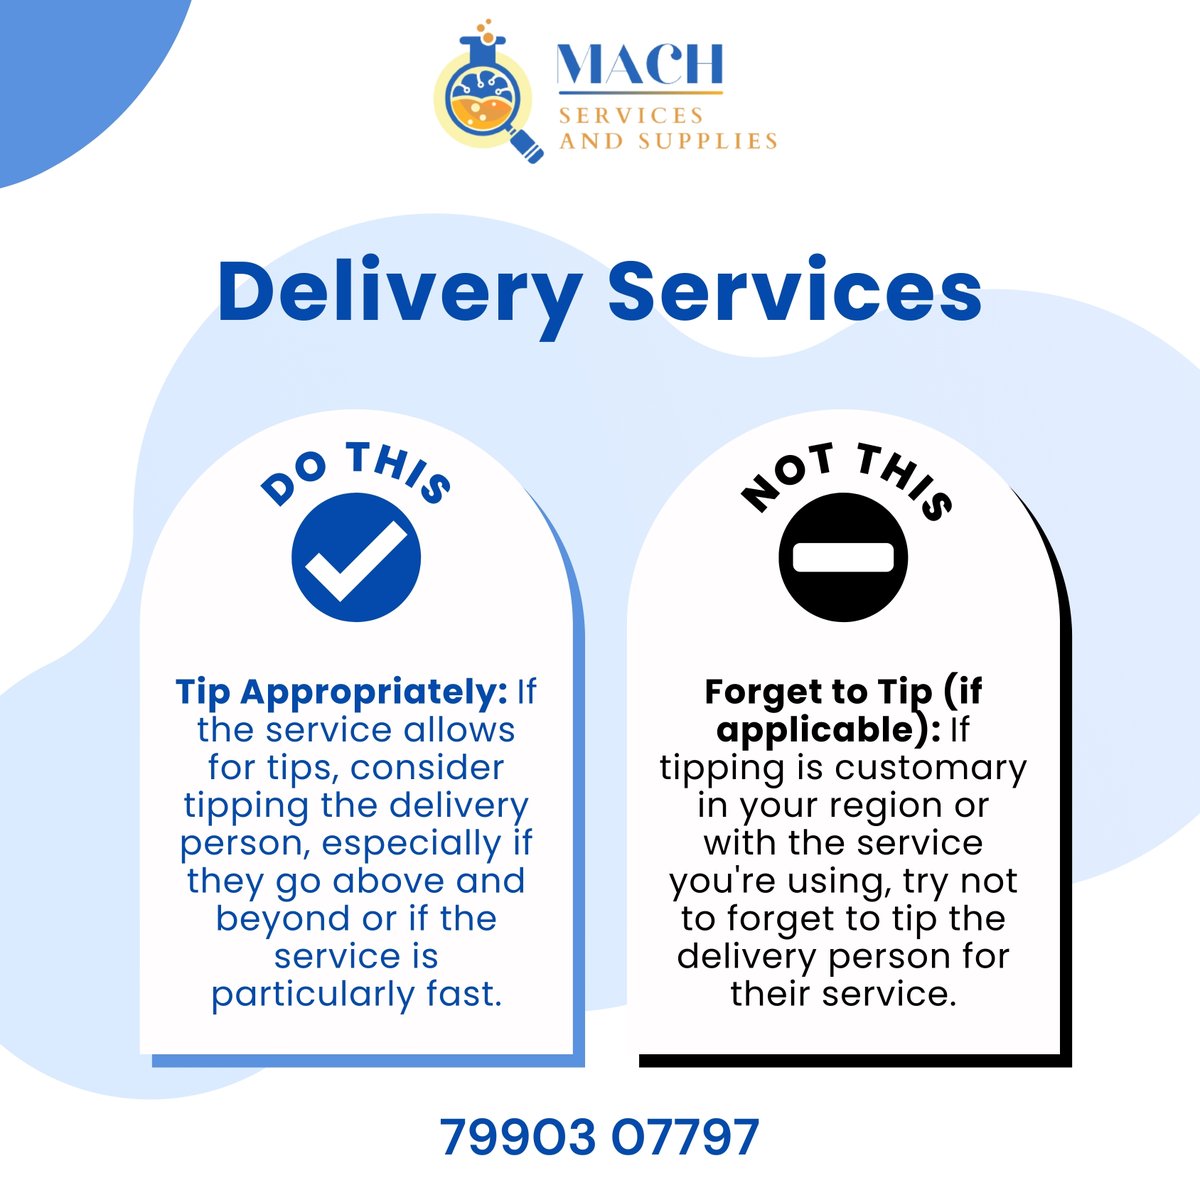 Do and Don't about delivery services.
.
.
#delivery #machservicesandsupplies #machservices #deliveryservice #style #love #instagood #like #photography #motivation #motivationalquotes #inspiration #surat #suratcity #suratfood #suratphotoclub #sunofcitysurat #sürat #wearehiring